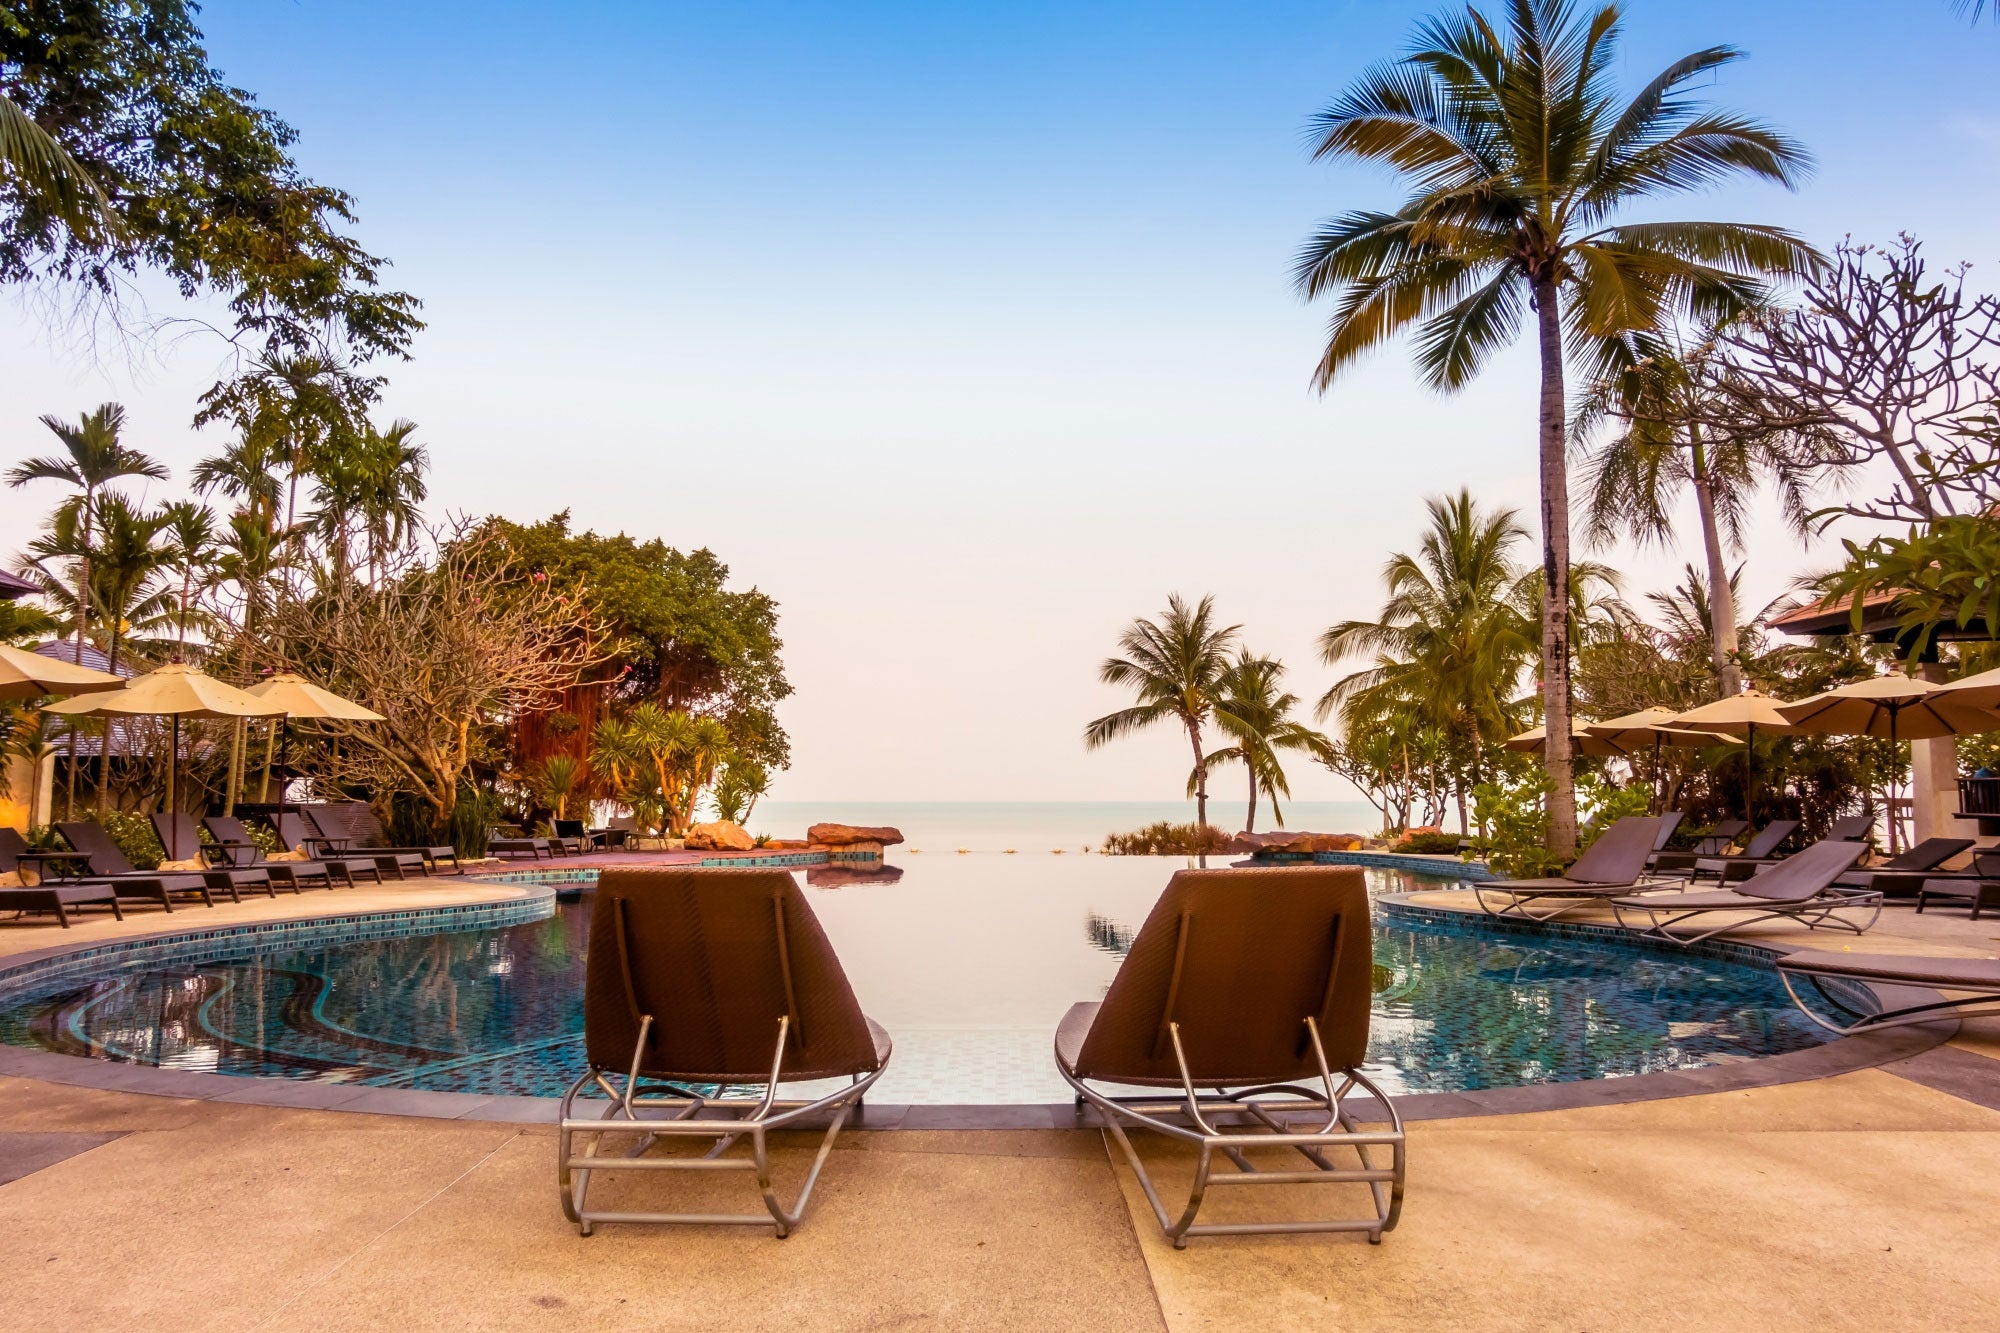 Couples-lounge-chairs-overlook-a-beach-resort